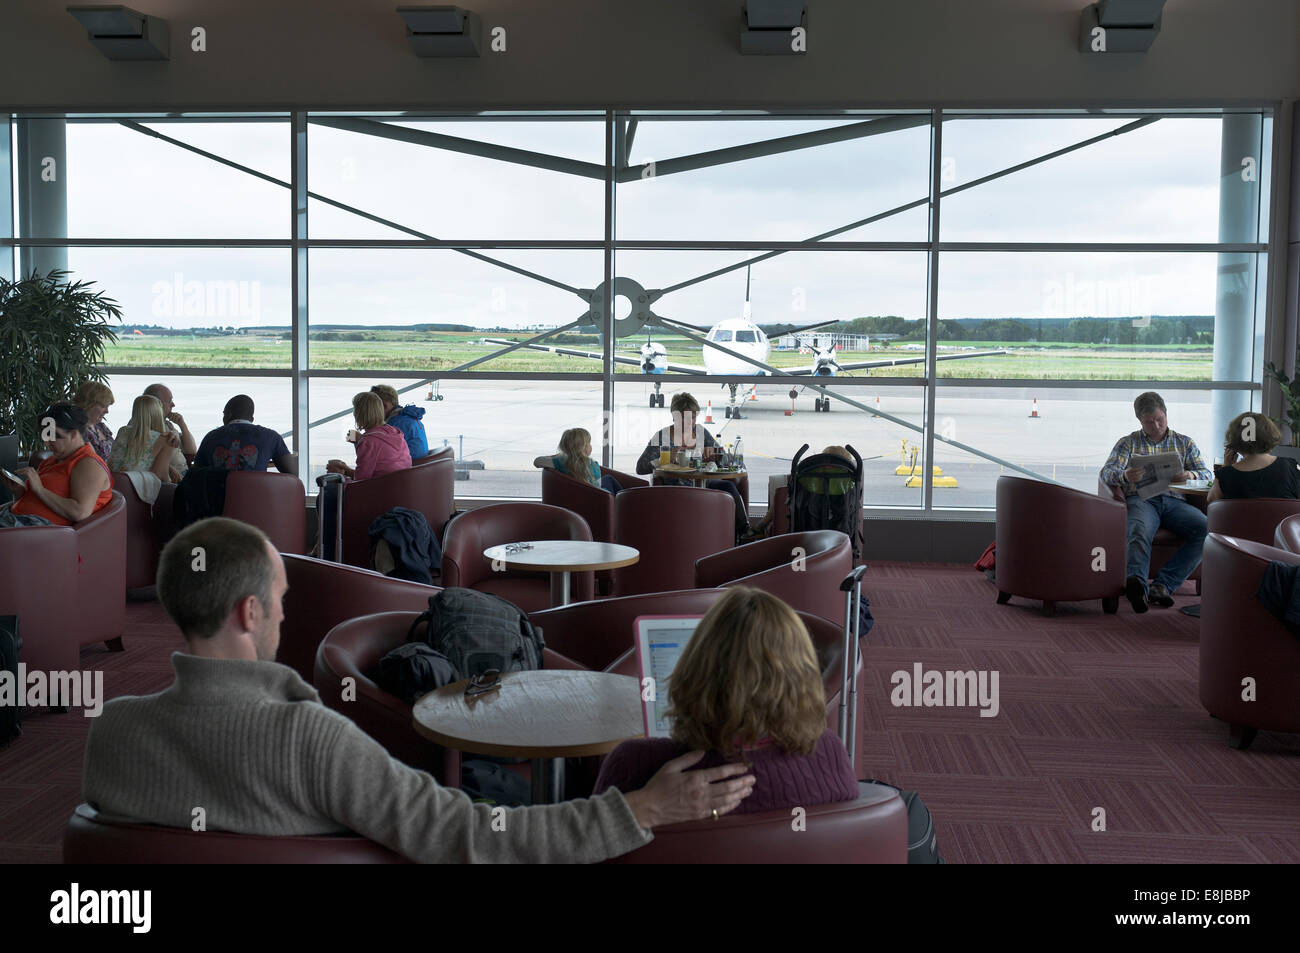 dh Passenger lounge INVERNESS AIRPORT INVERNESSSHIRE British couple passengers small departure uk scotland terminal lounges interior airport Stock Photo